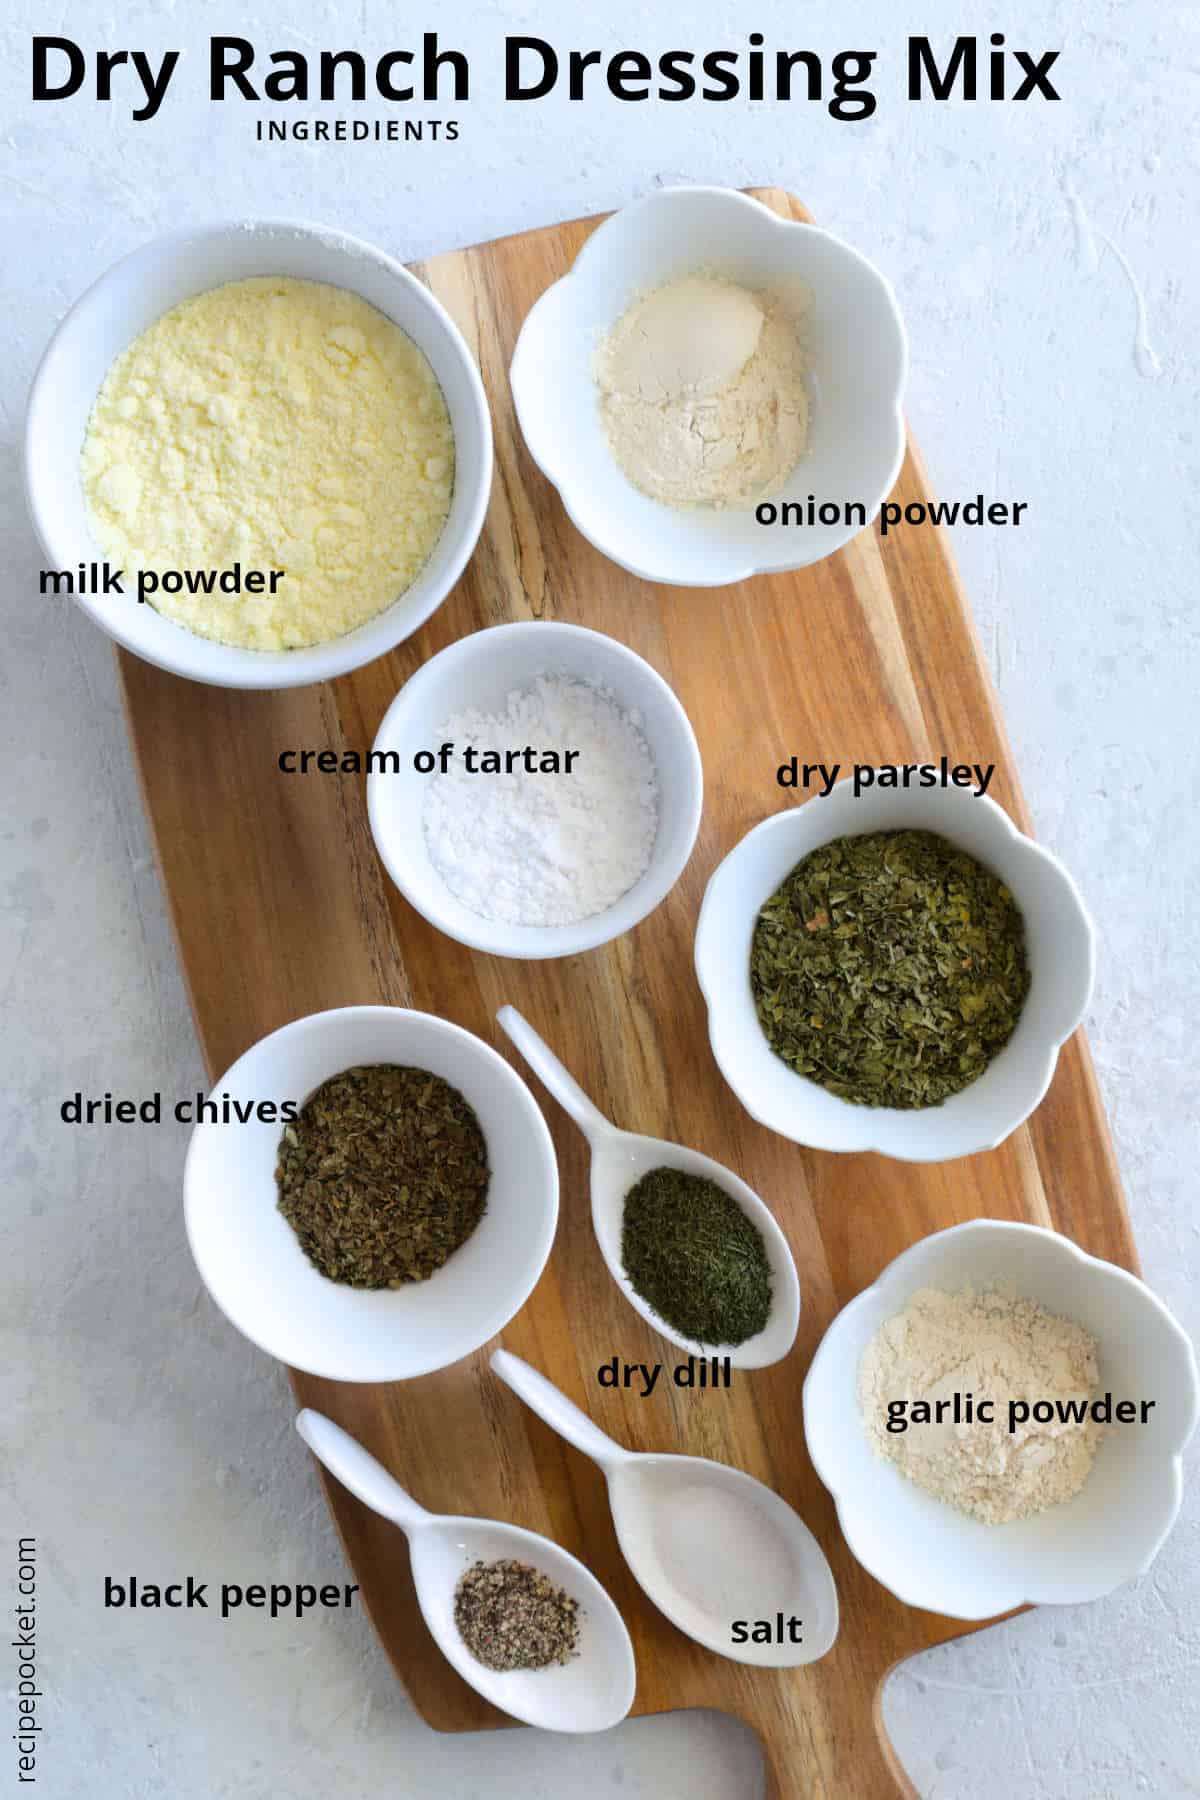 Image showing ingredients for dry ranch dressing mix.